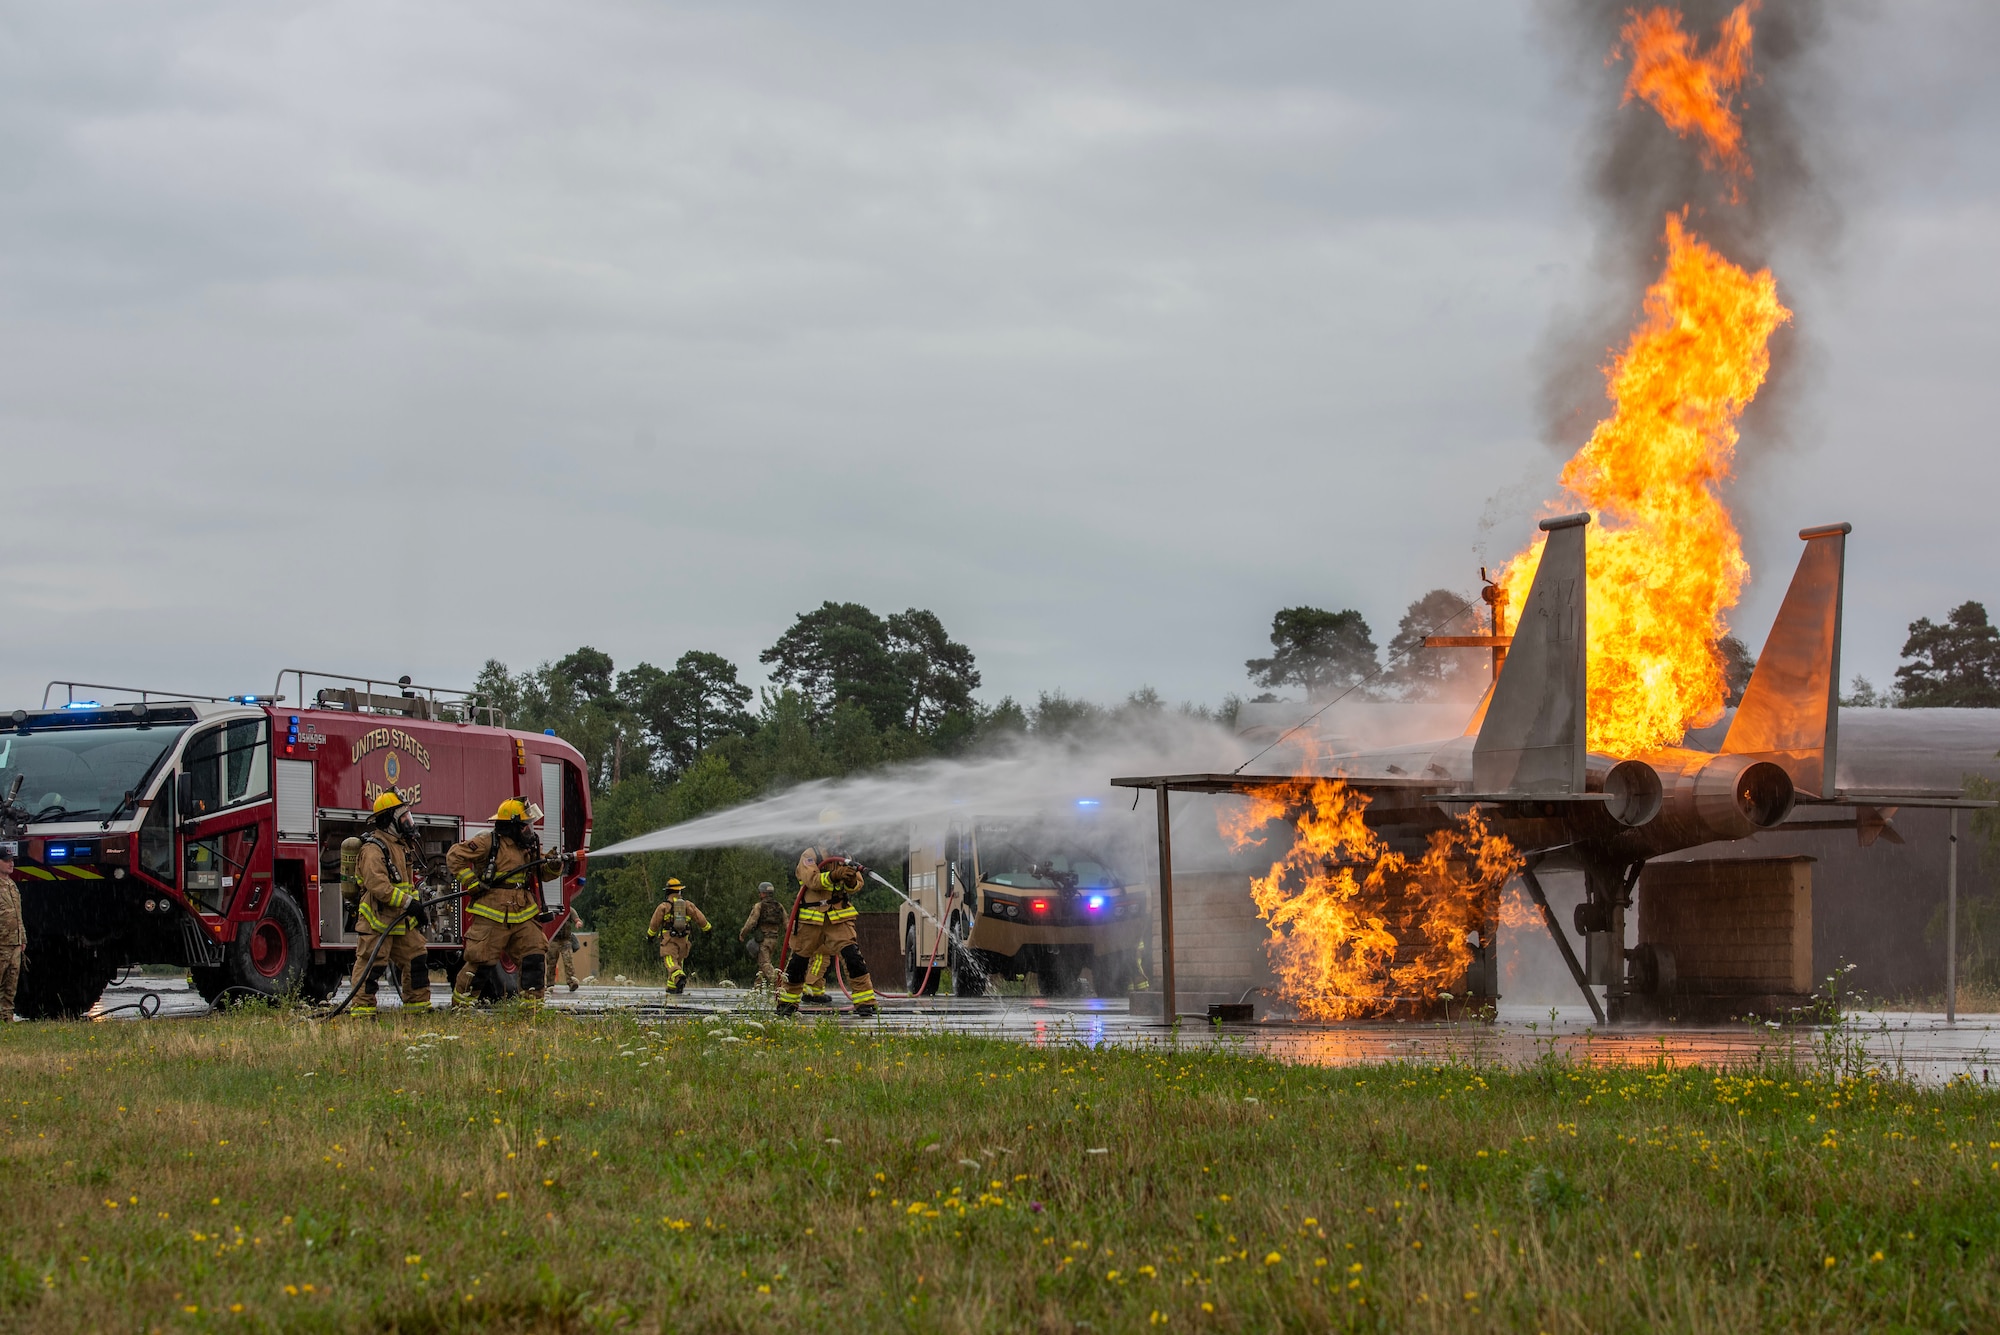 Firefighters use a hose to put out a fire on an F-15 replica